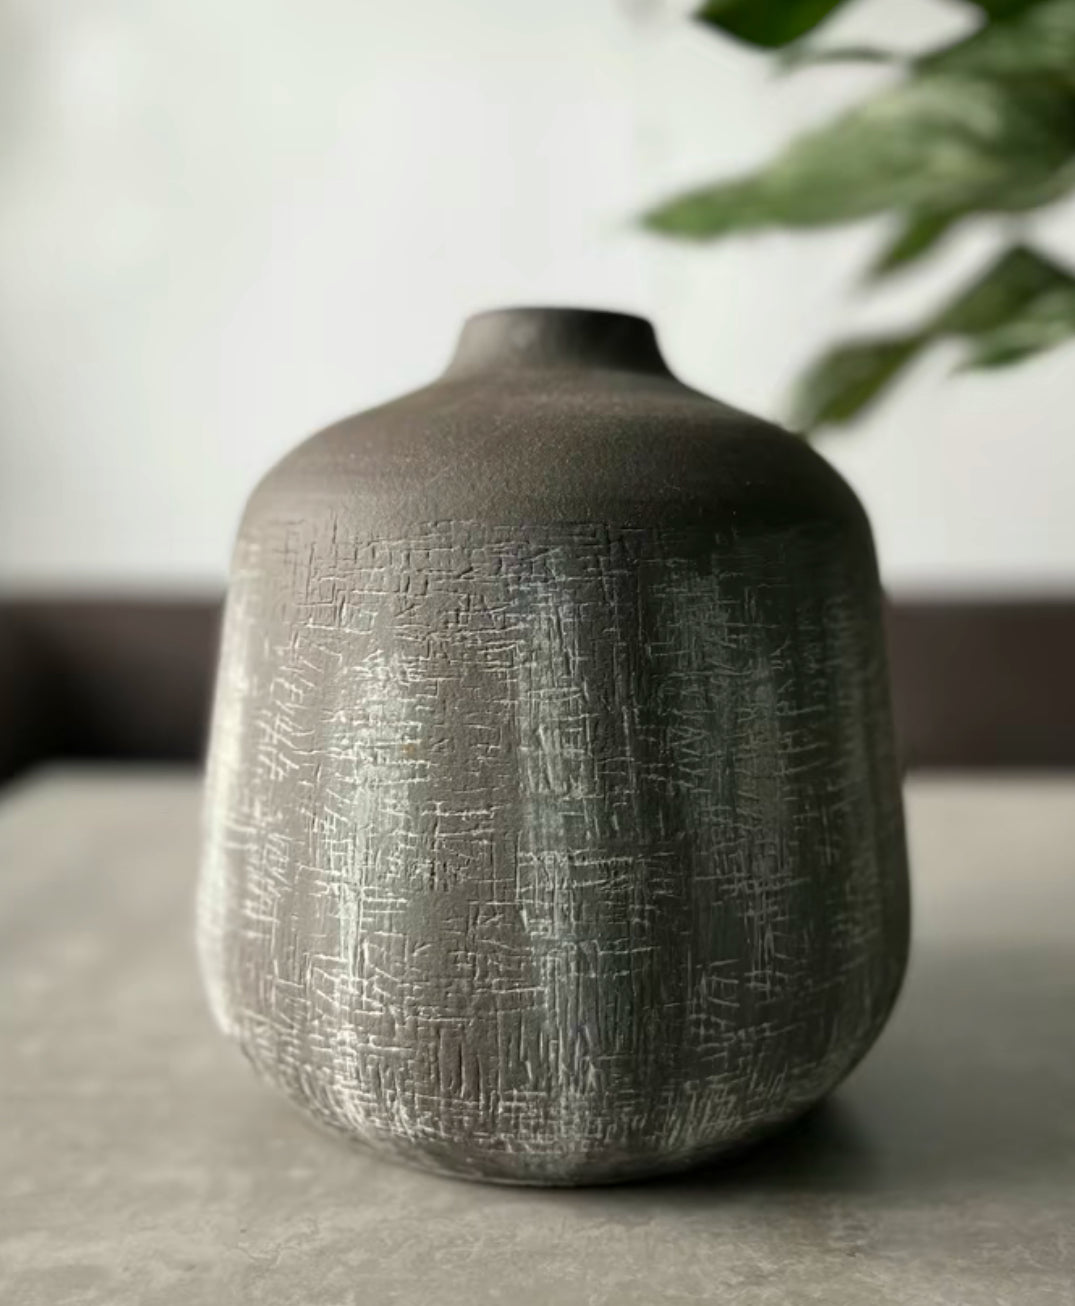 Terracotta stone colour vases - grey and charcoal grey/brown for dried flowers & pampas grass